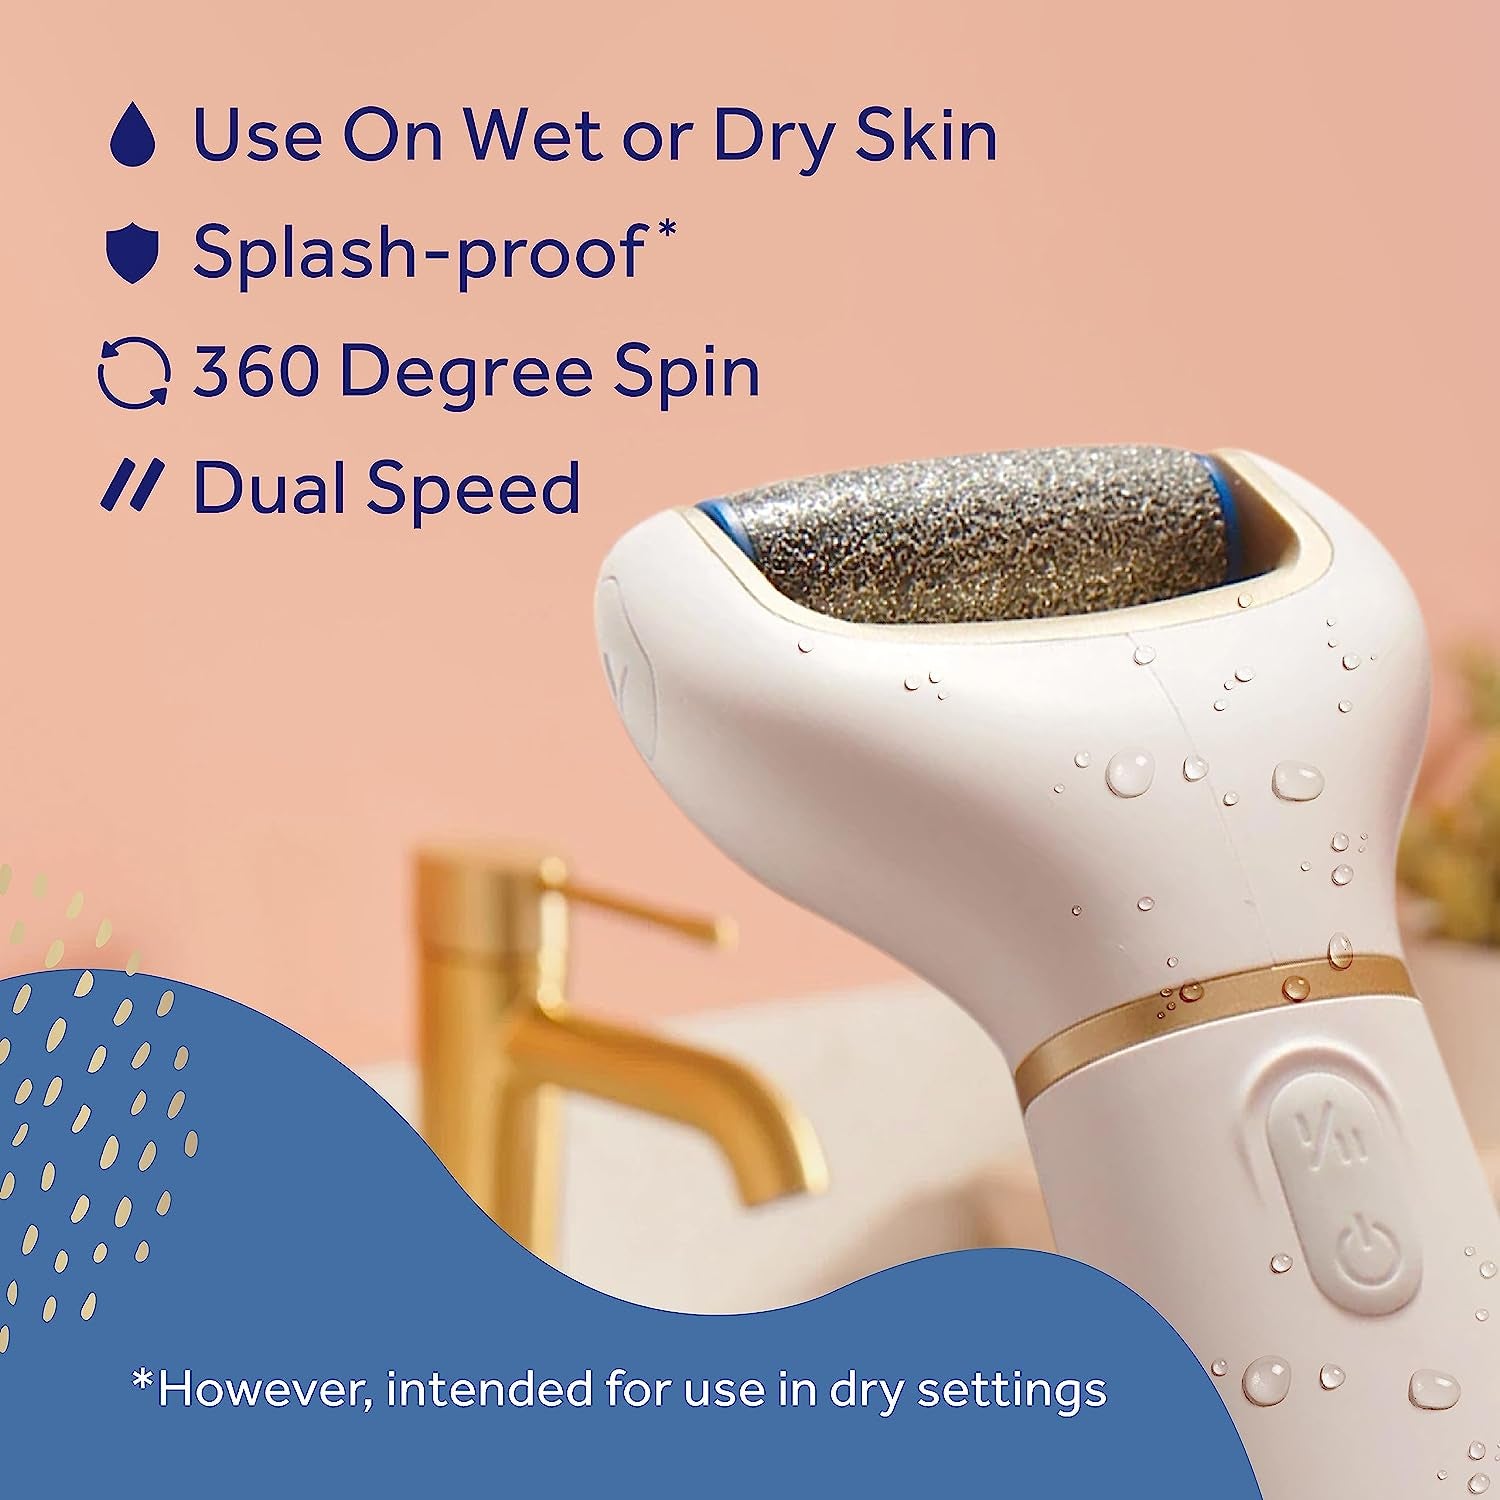 Amopé Pedi Perfect Electric Callus Remover Foot File W/ Diamond Crystals, Pedicure Tool for Feet, Removes Hard & Dead Skin, Feet Scrubber & Buffer, Splashproof, W/ Extra Coarse Roller Head, 1 Count